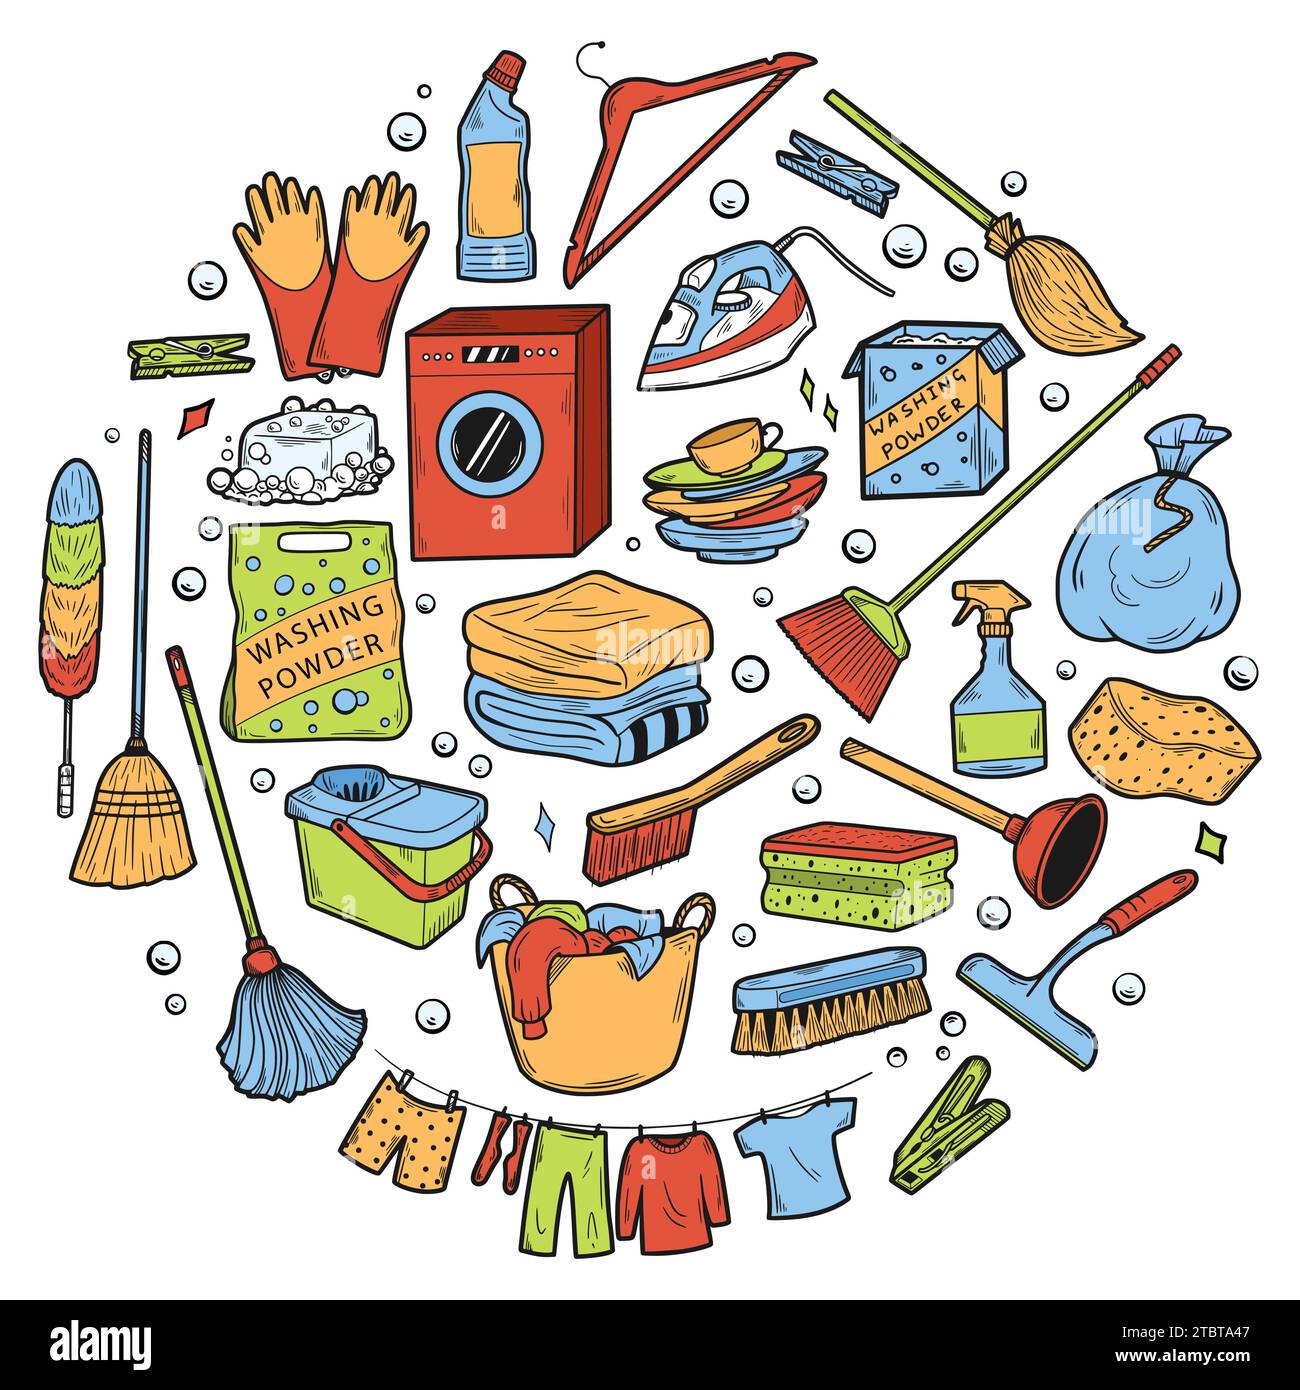 Premium Vector  Cleaning tools doodle illustration with colored hand drawn  style